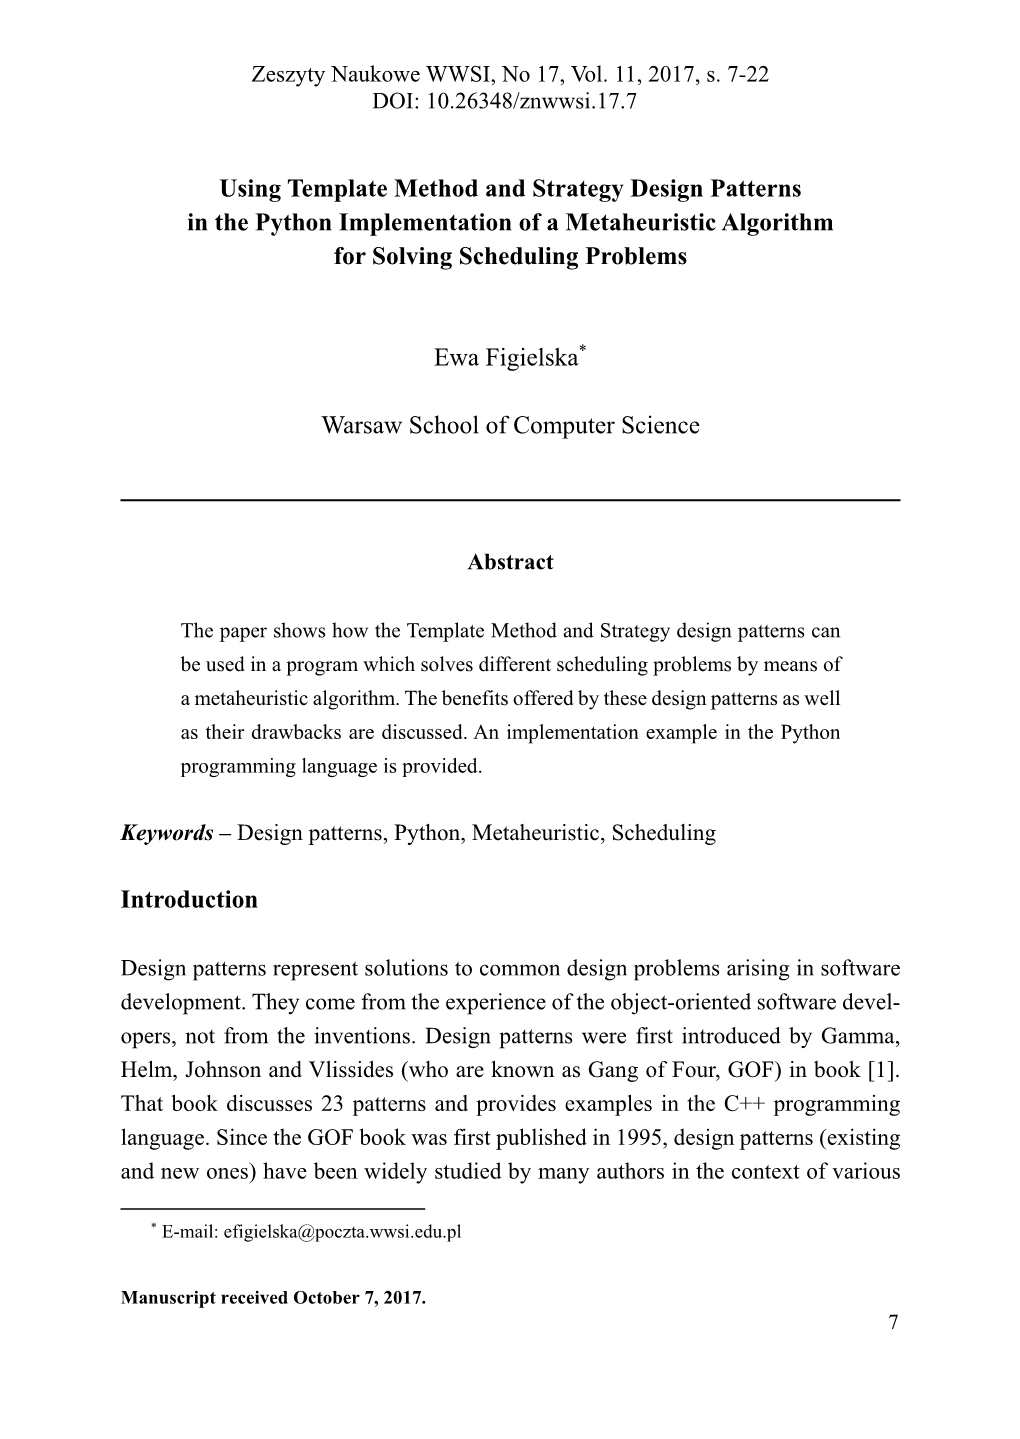 Using Template Method and Strategy Design Patterns in the Python Implementation of a Metaheuristic Algorithm for Solving Scheduling Problems